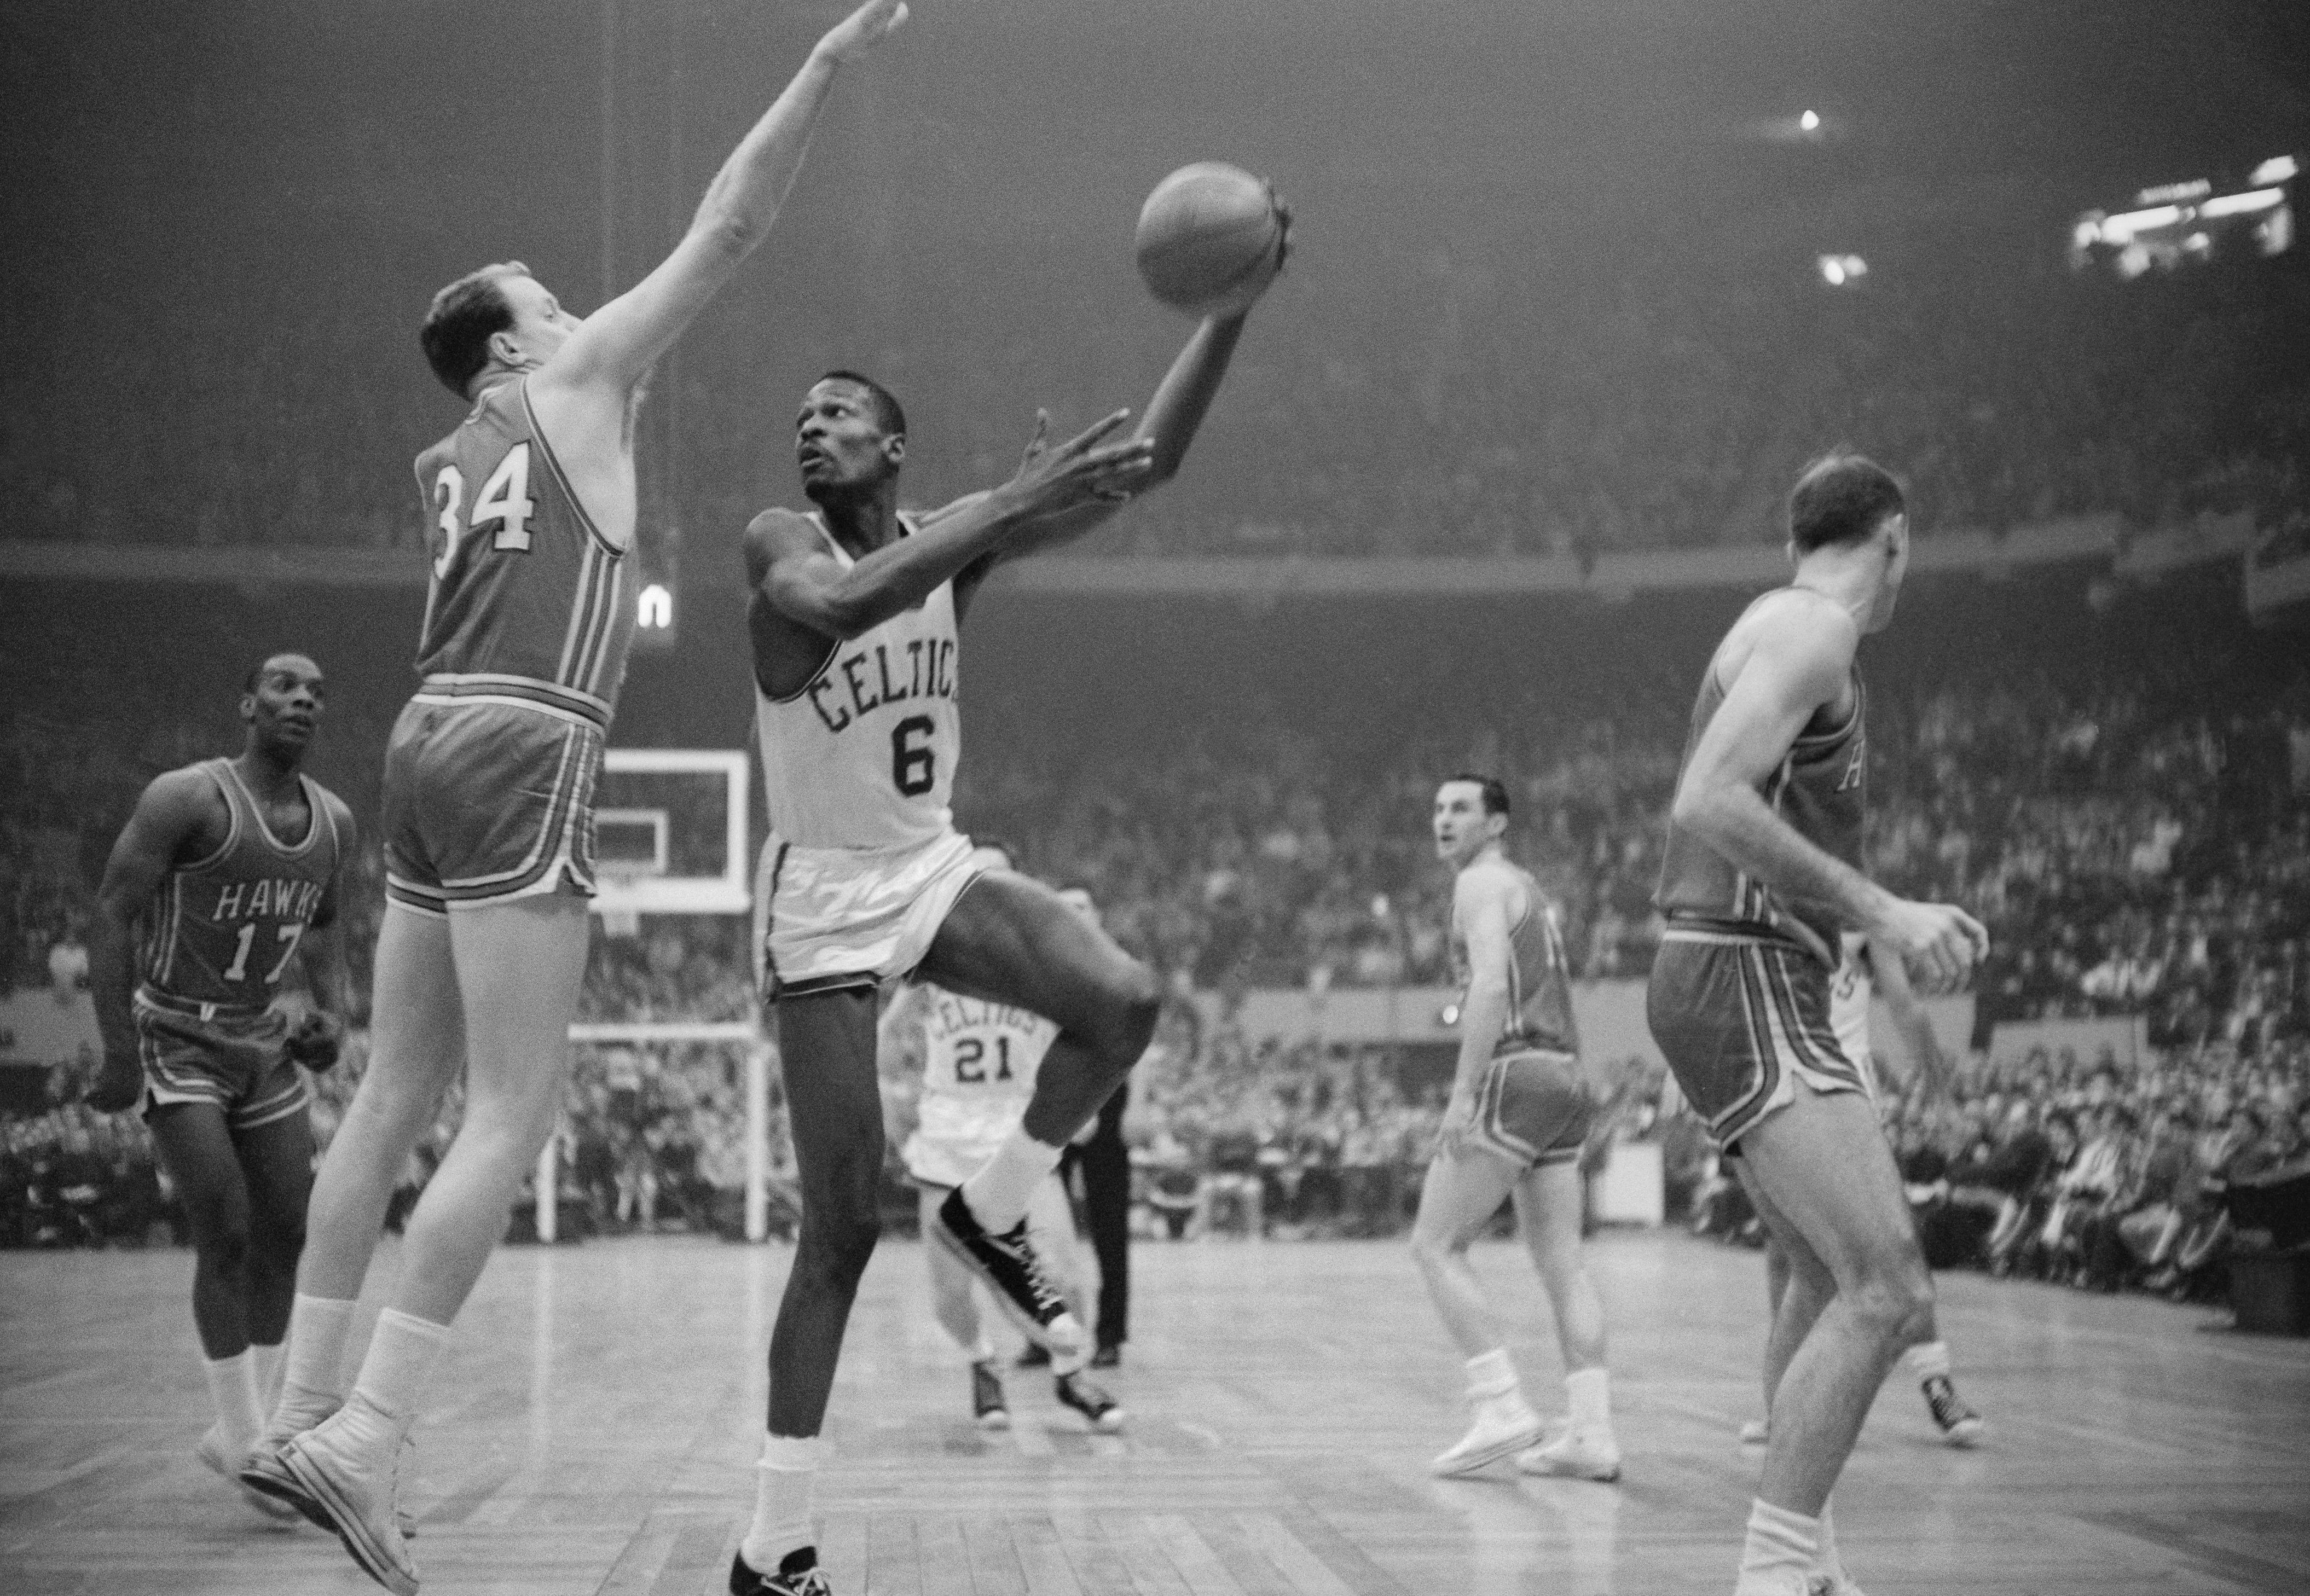 Bill Russell hooks a shot during the NBA championship's final game between the Boston Celtics and the Saint Louis Hawks in 1960. | Source: Getty Images